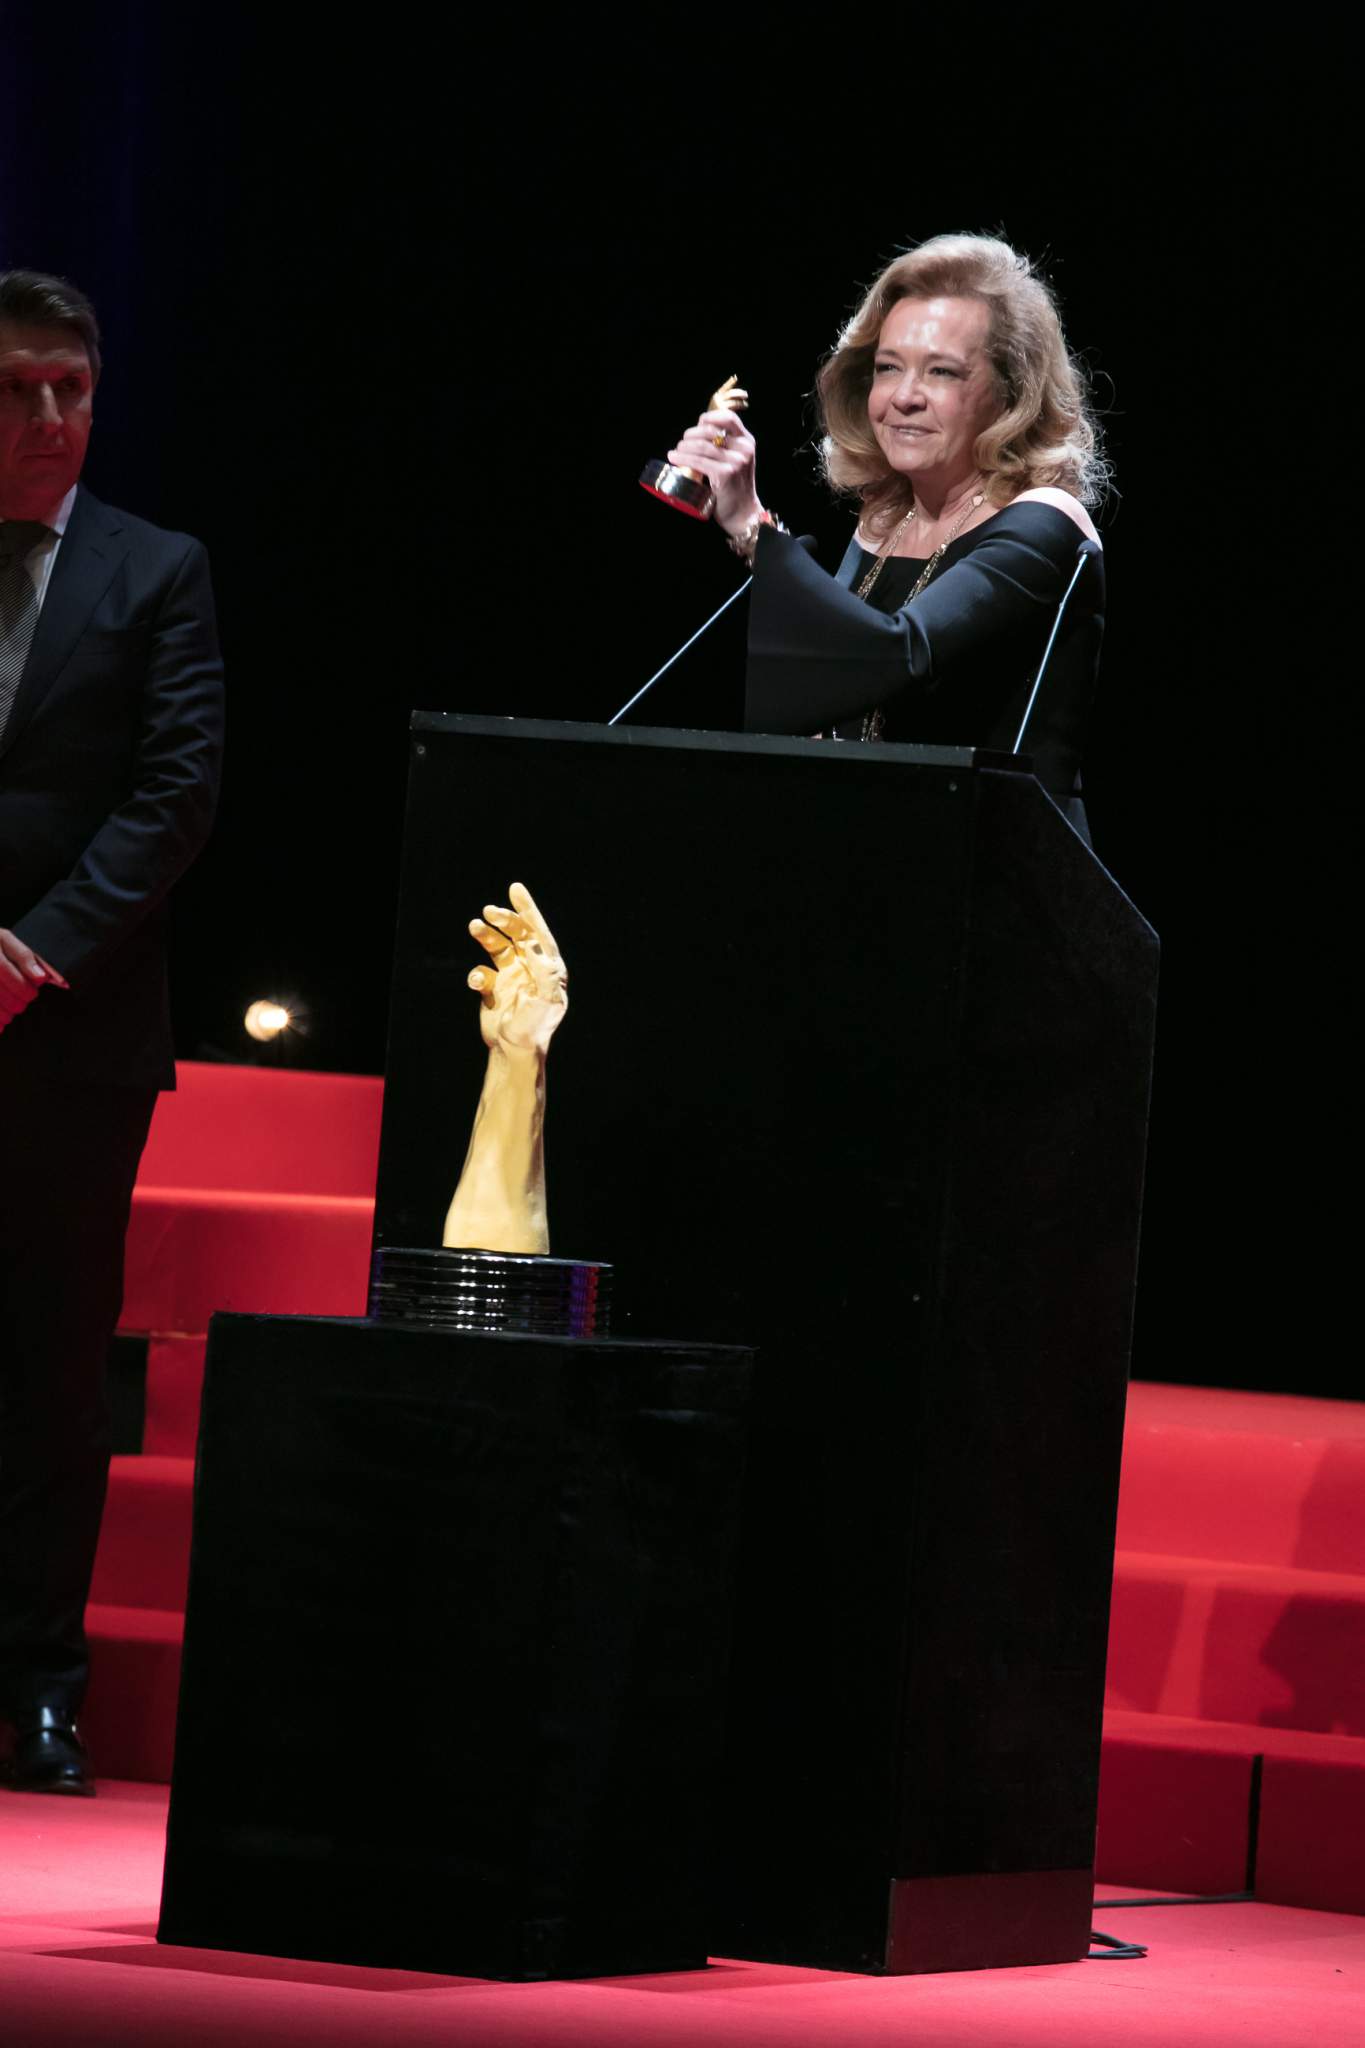 Caroline Scheufele (Co-President of Chopard, winner of the « Aiguille d’Or » Grand Prix 2017 and the Jewellery Watch Prize 2017)